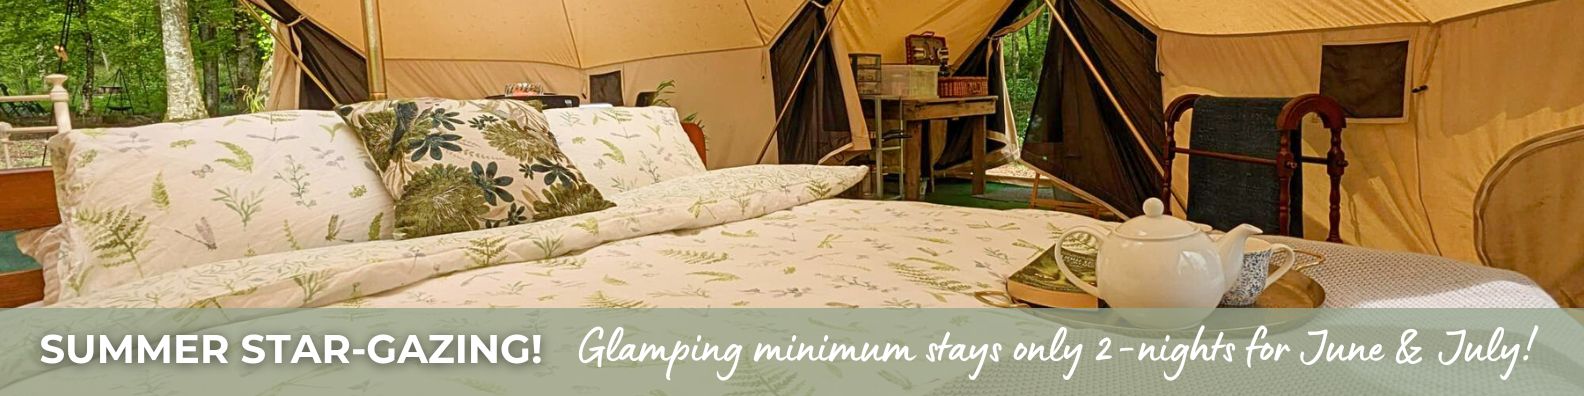 Wytch Wood Camping and Glamping | Somerset | Glamping minimum stays only 2 nights for June & July!